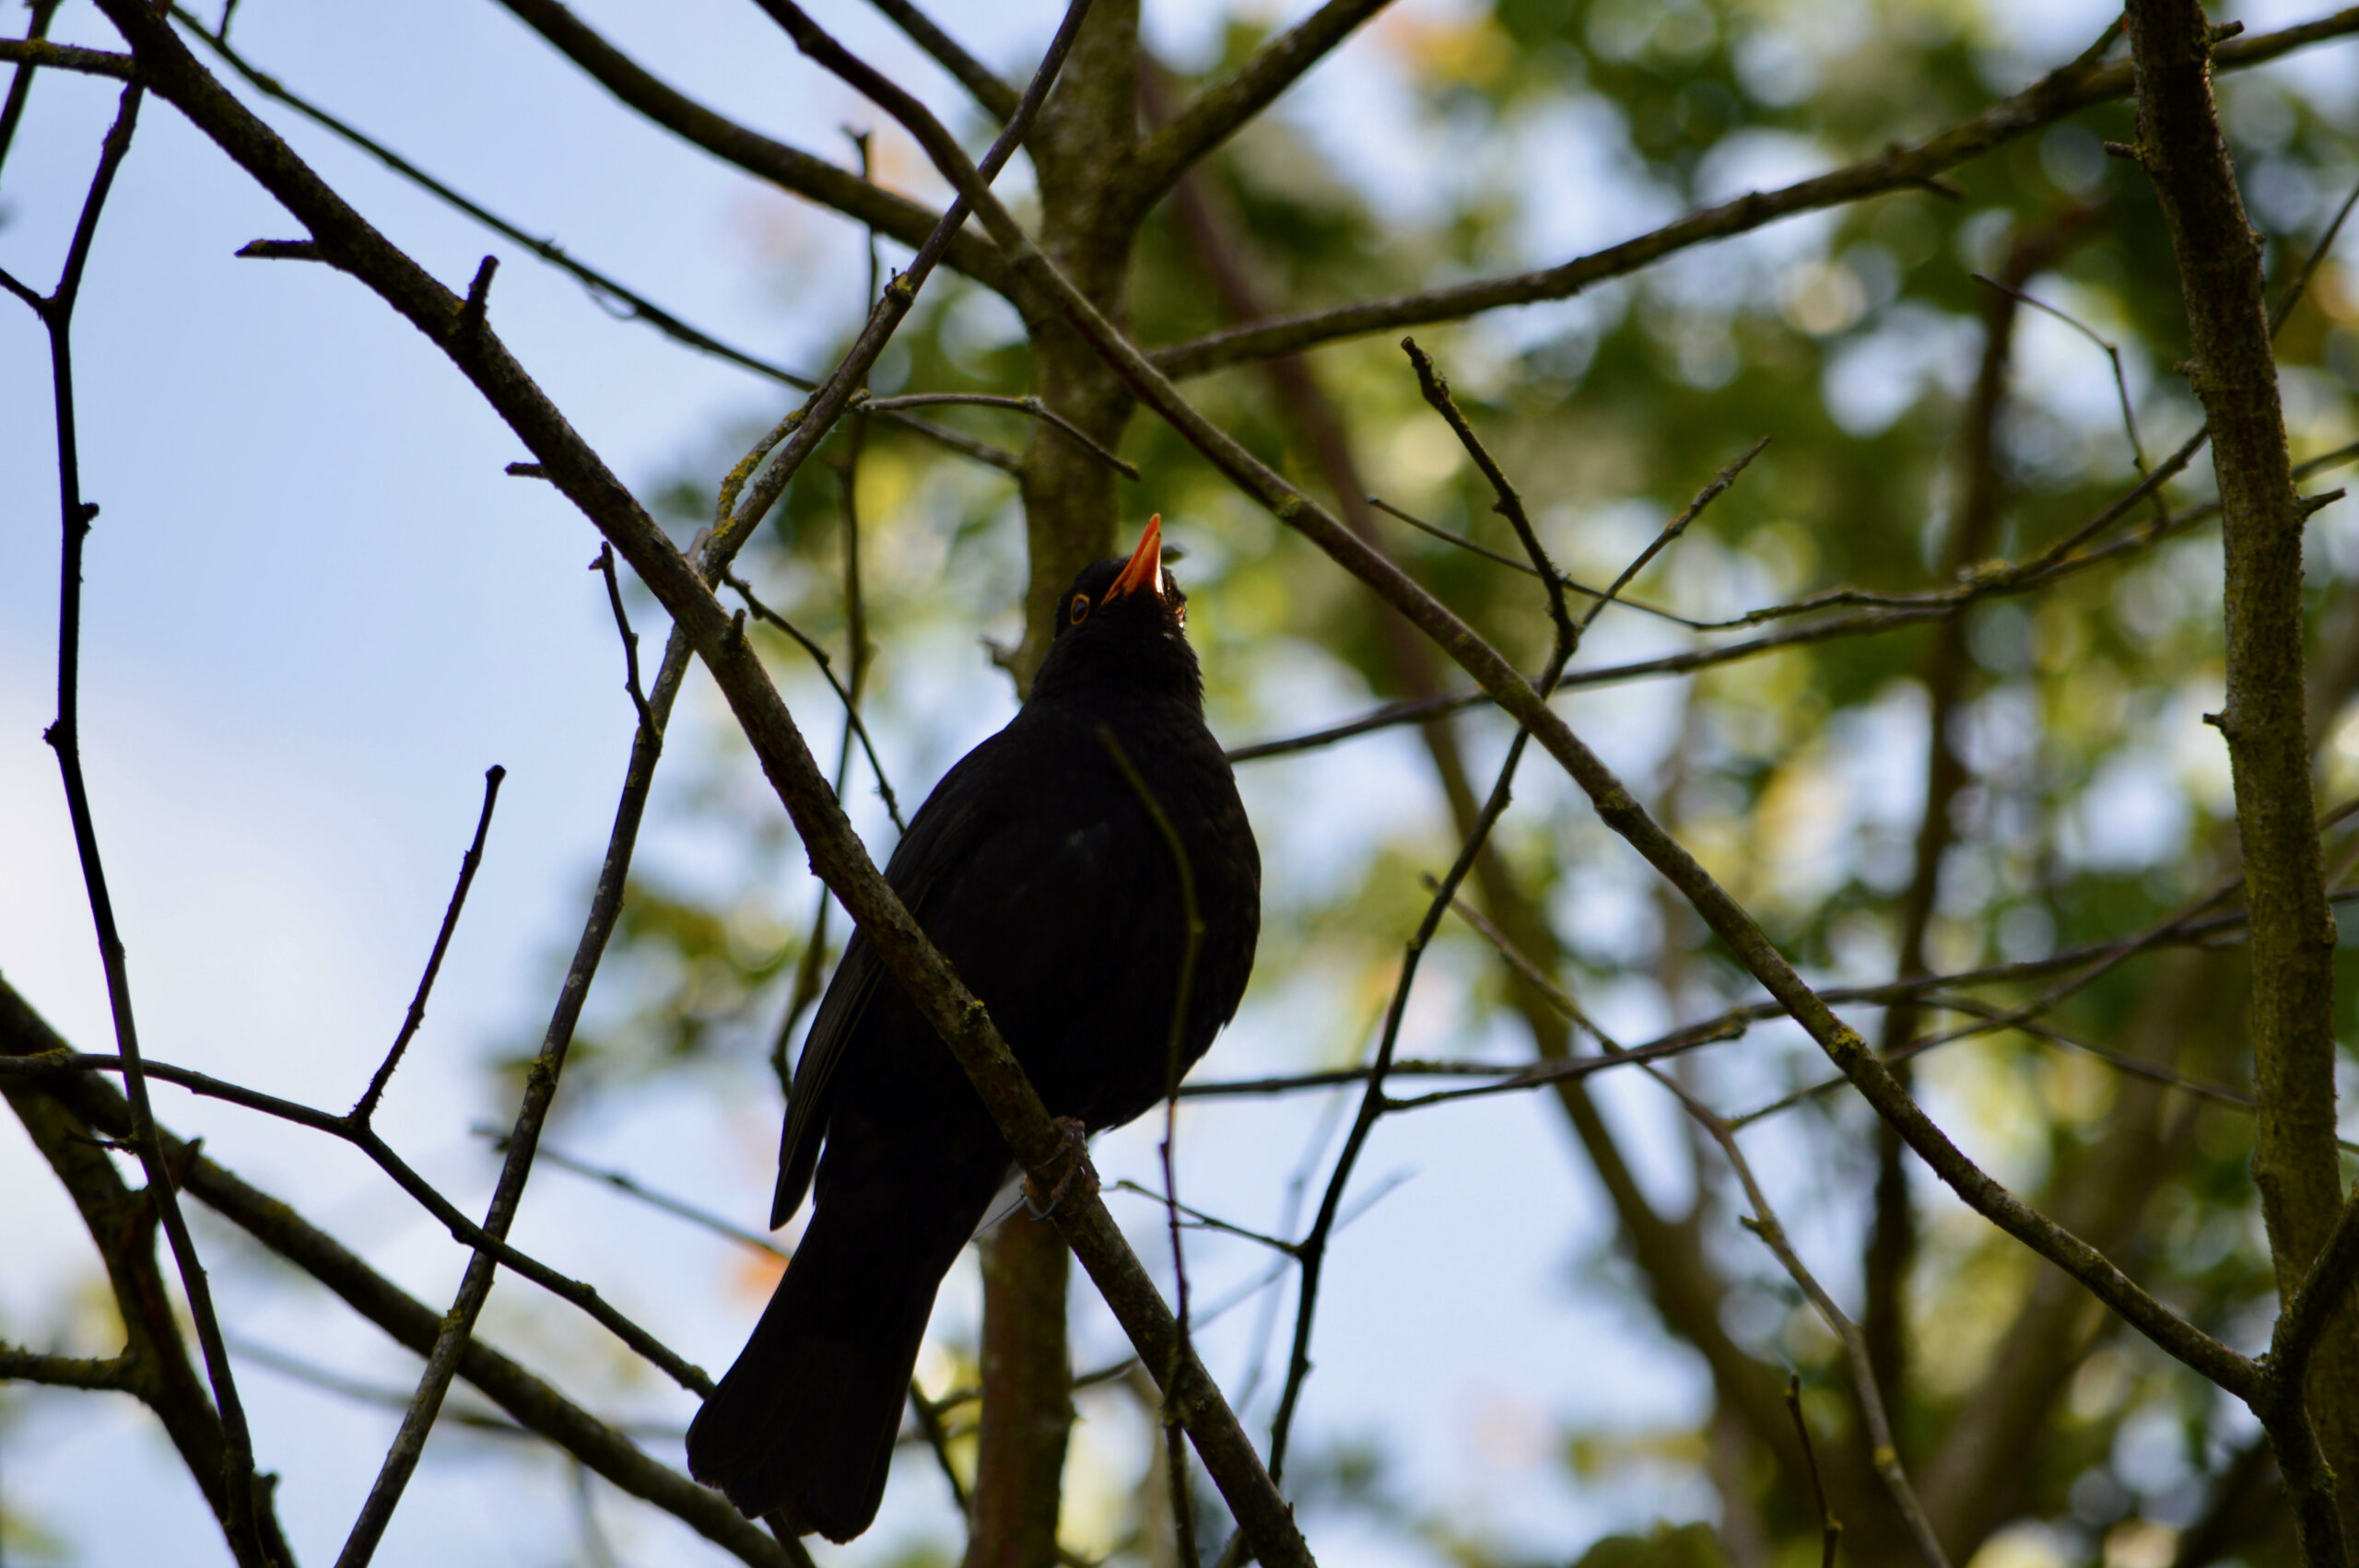 Blackbird stood on a branch with trees and blue sky behind it.